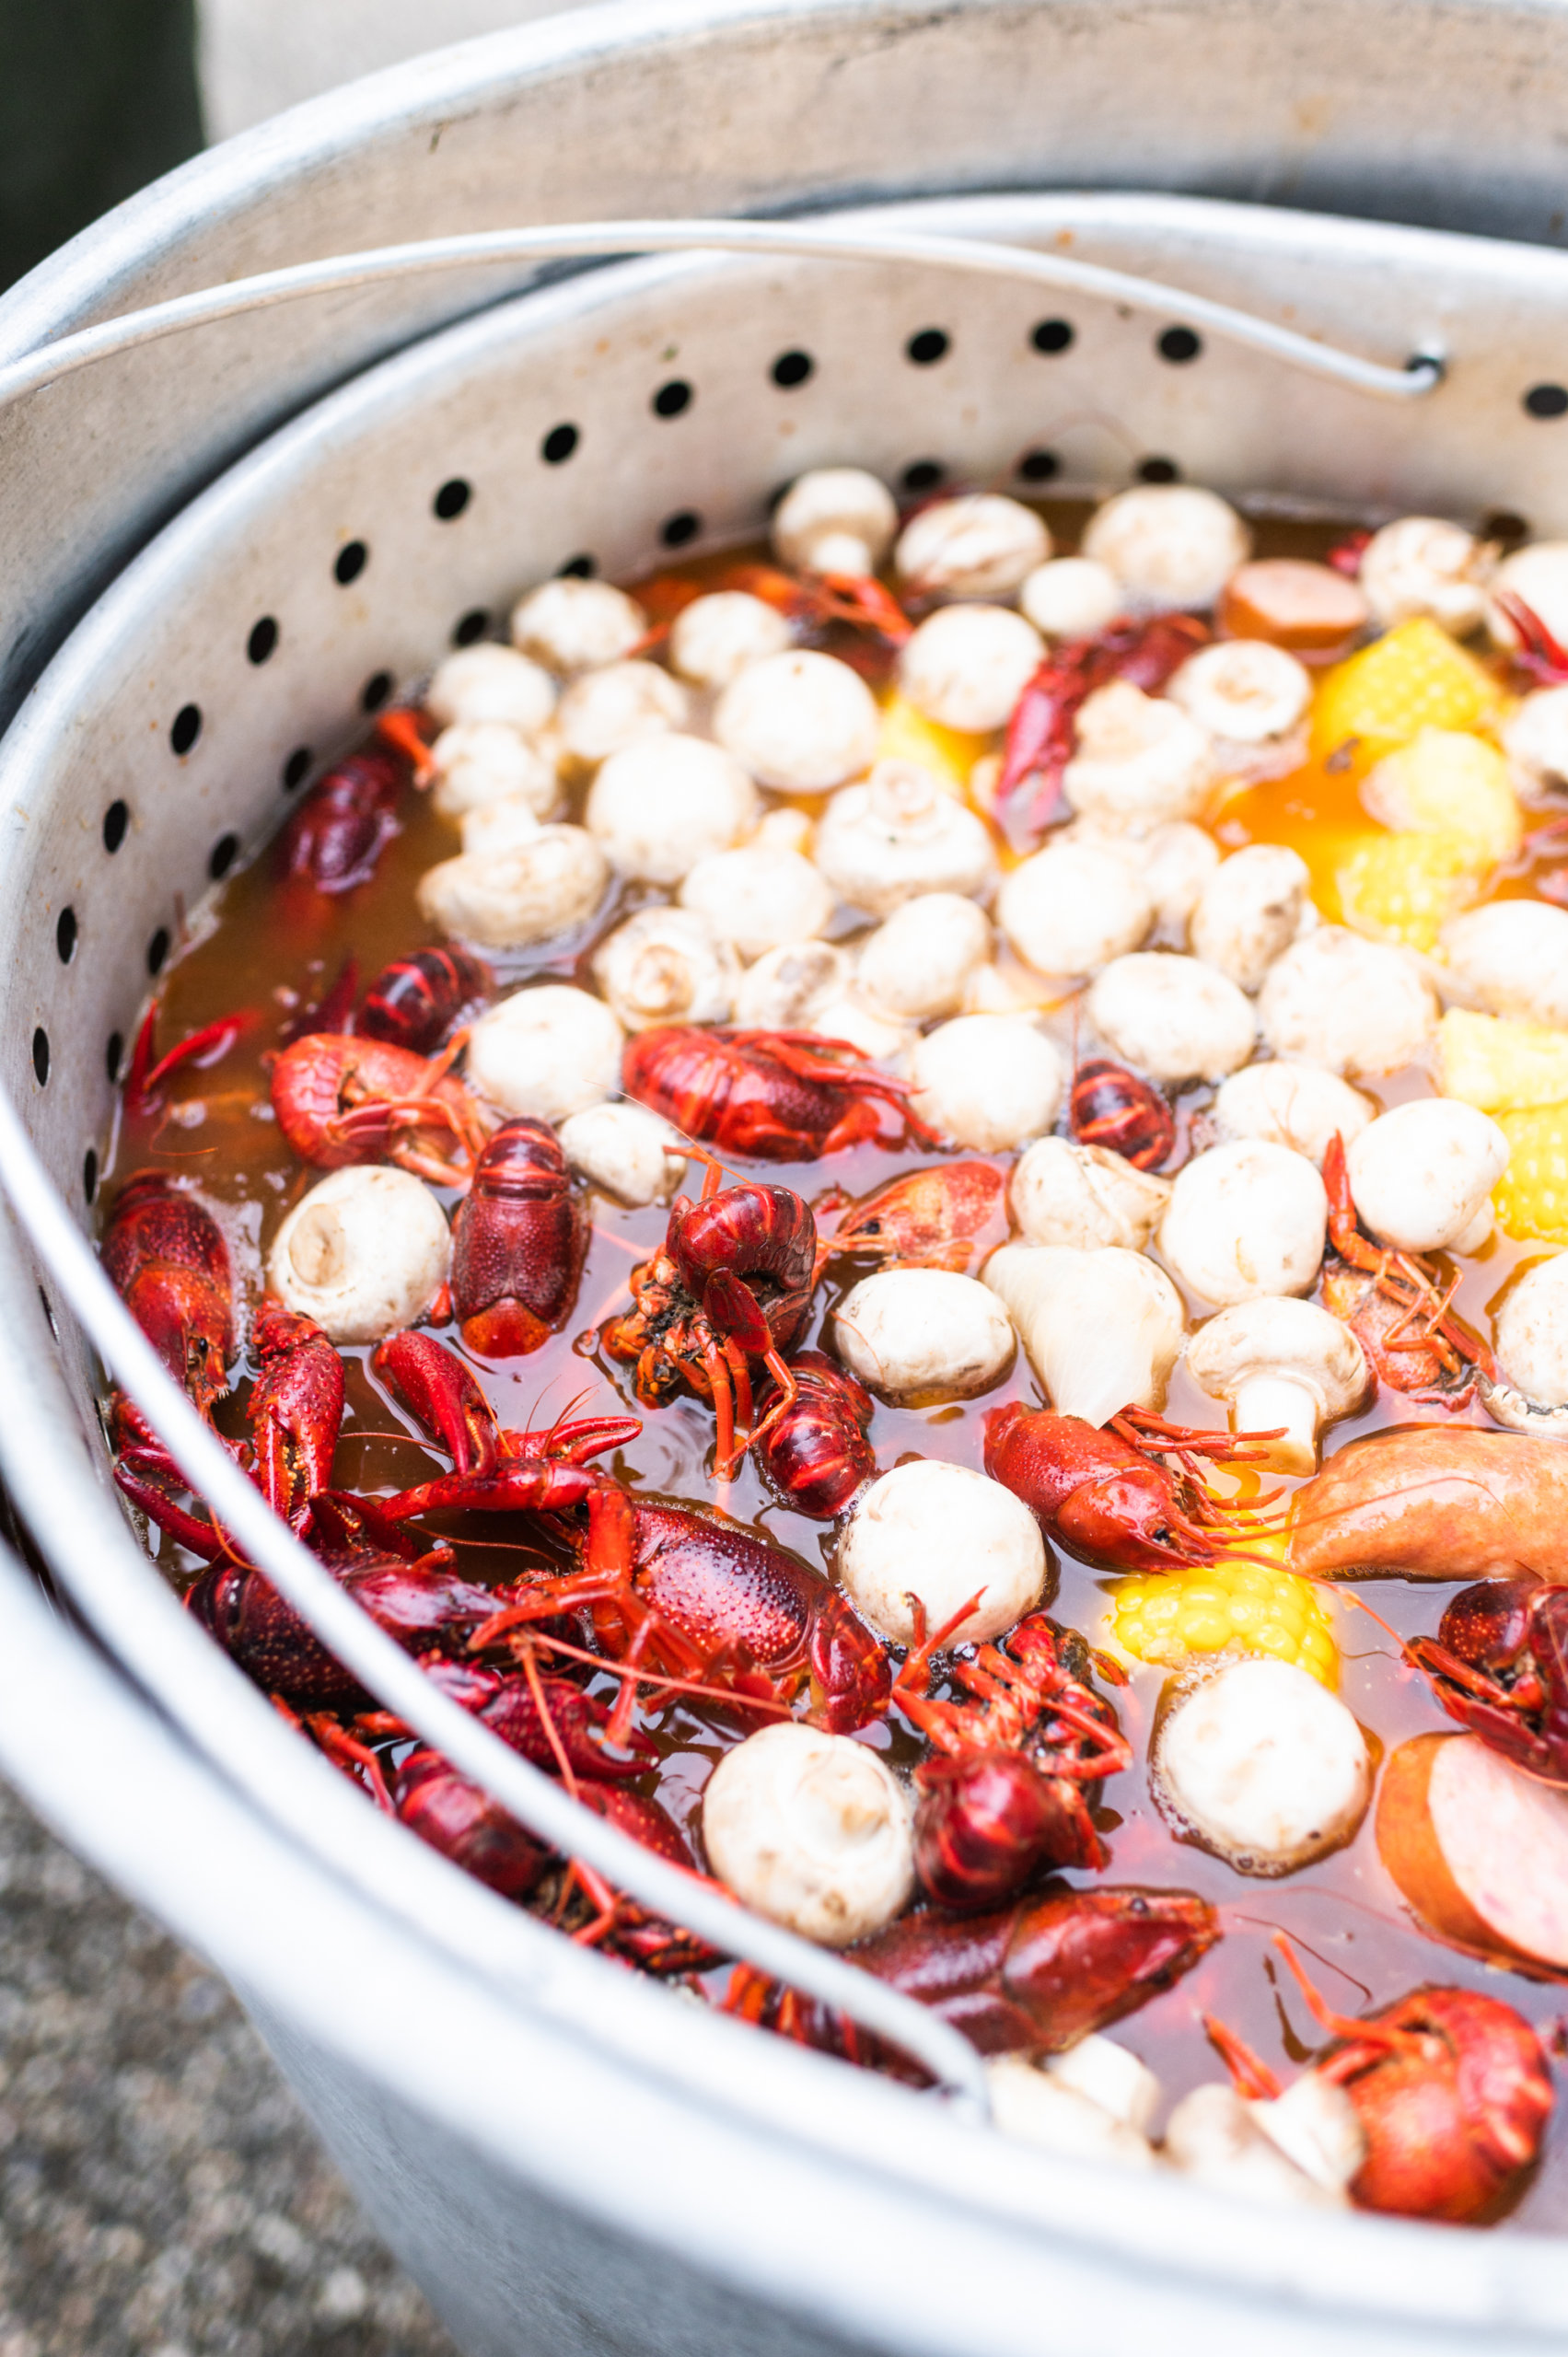 Crawfish soaking after the boil, with mushrooms, corn, sausage, pineapple, and canned green beans